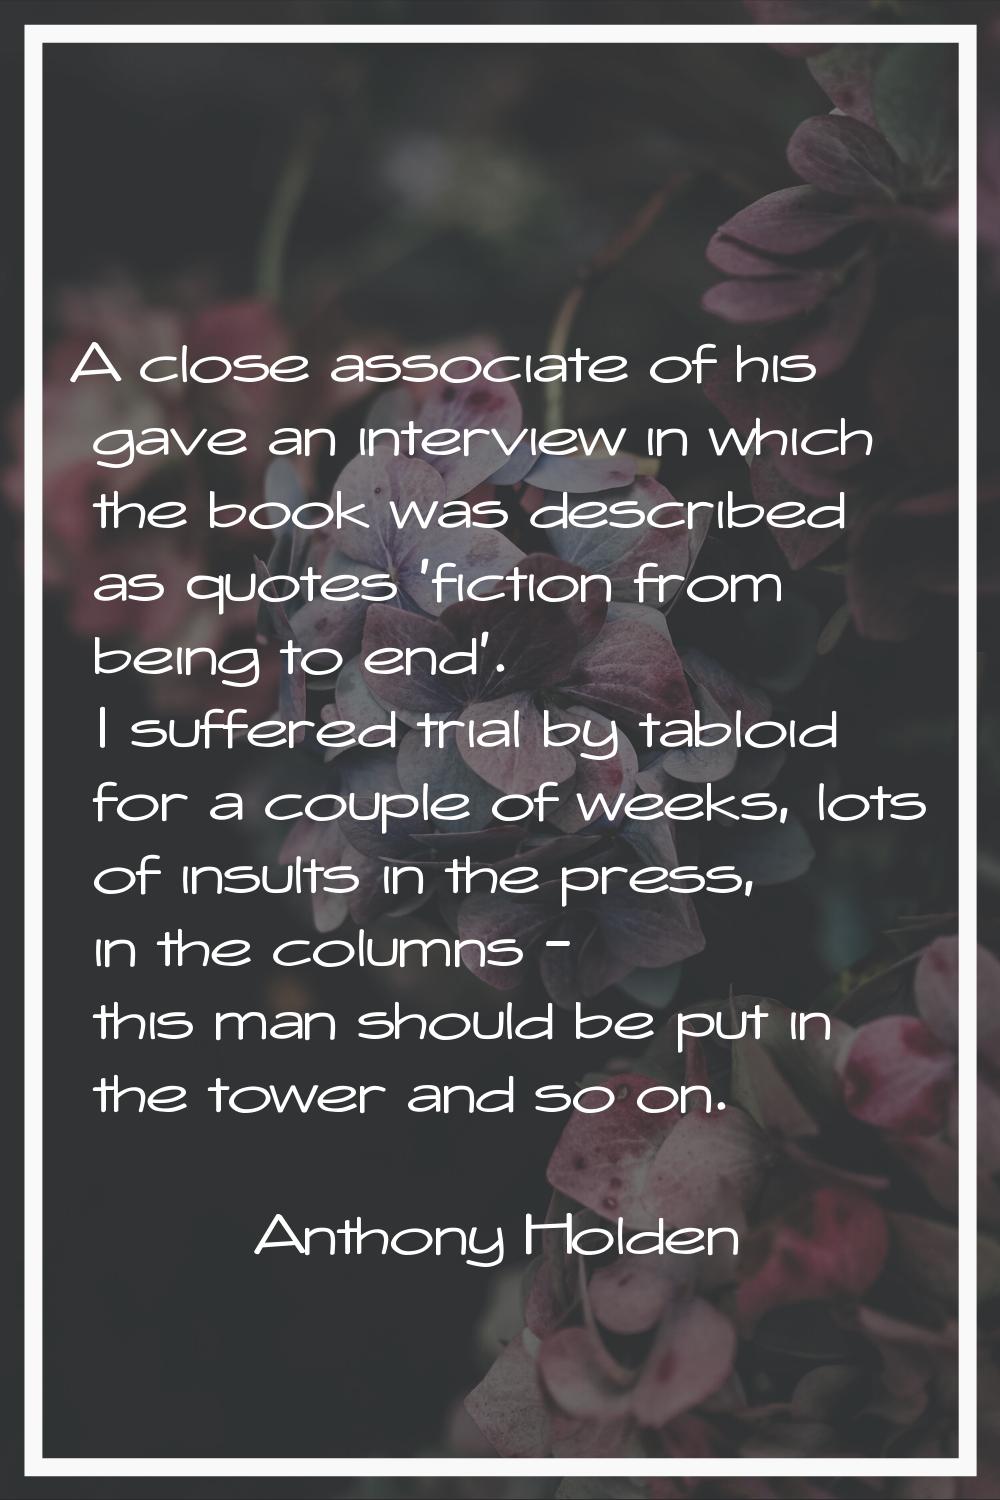 A close associate of his gave an interview in which the book was described as quotes 'fiction from 